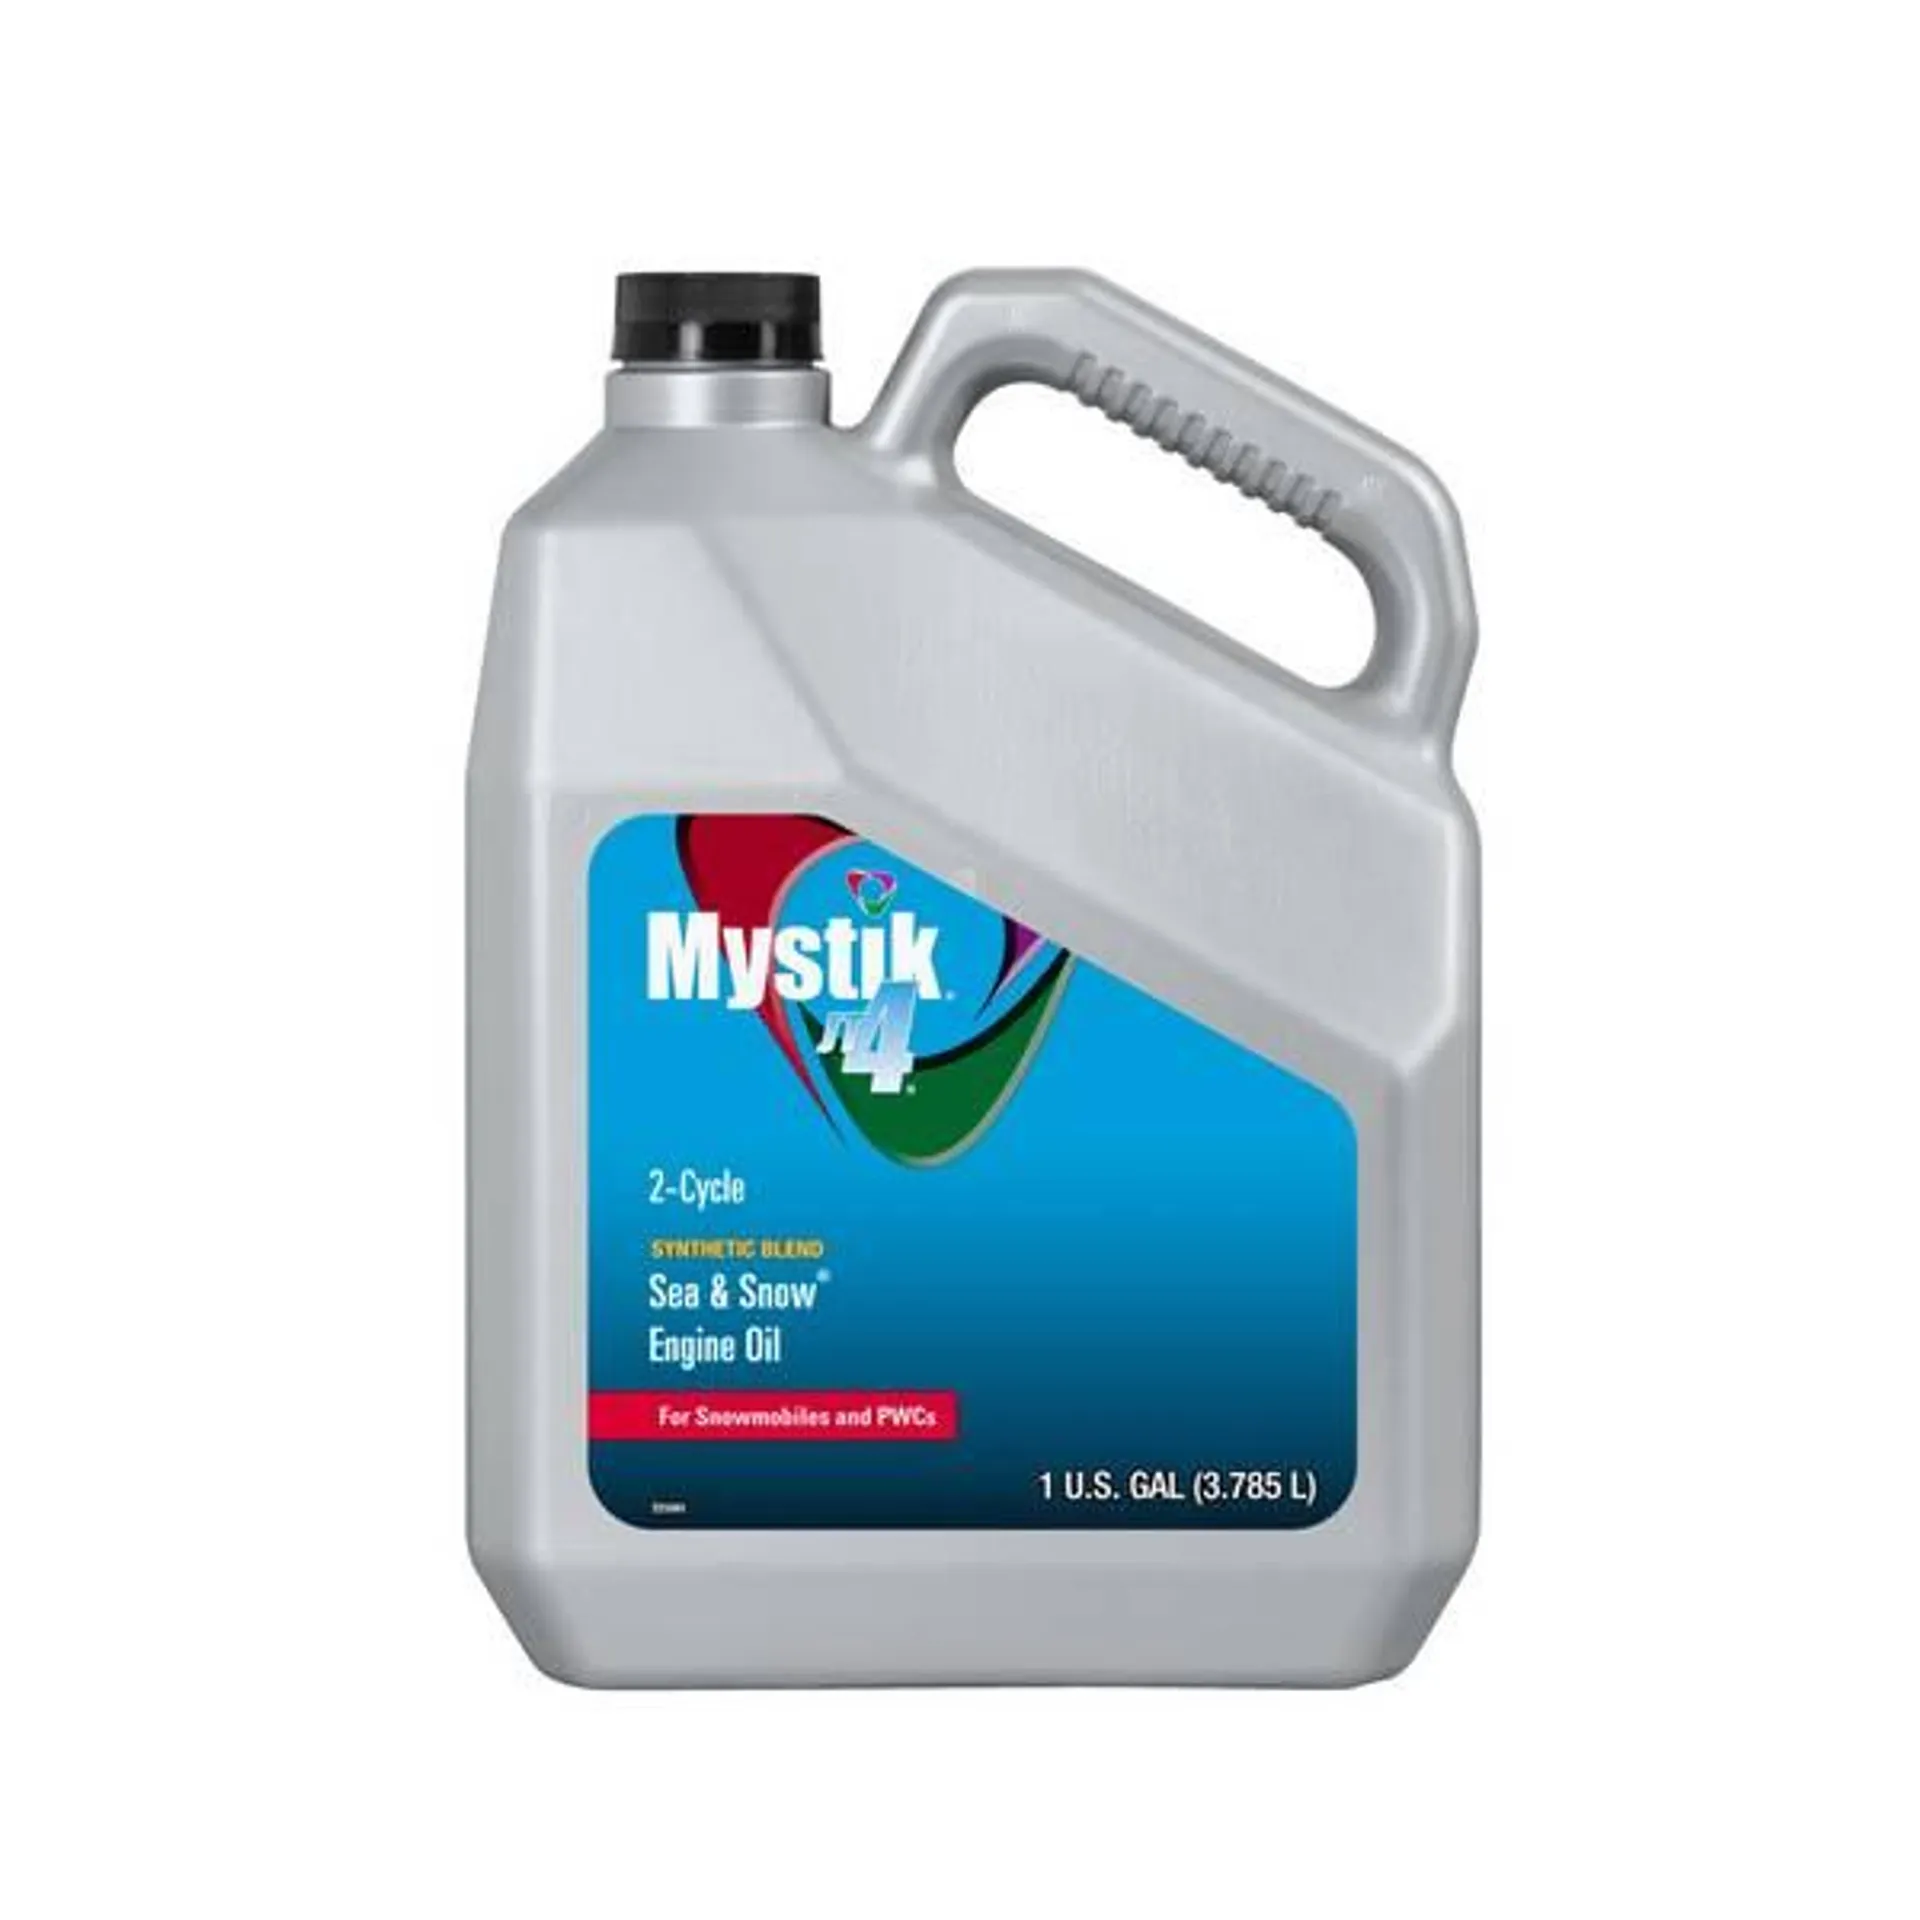 1 Gal JT-4 2-Cycle Sea and Snow 2 Cycle Motor Oil